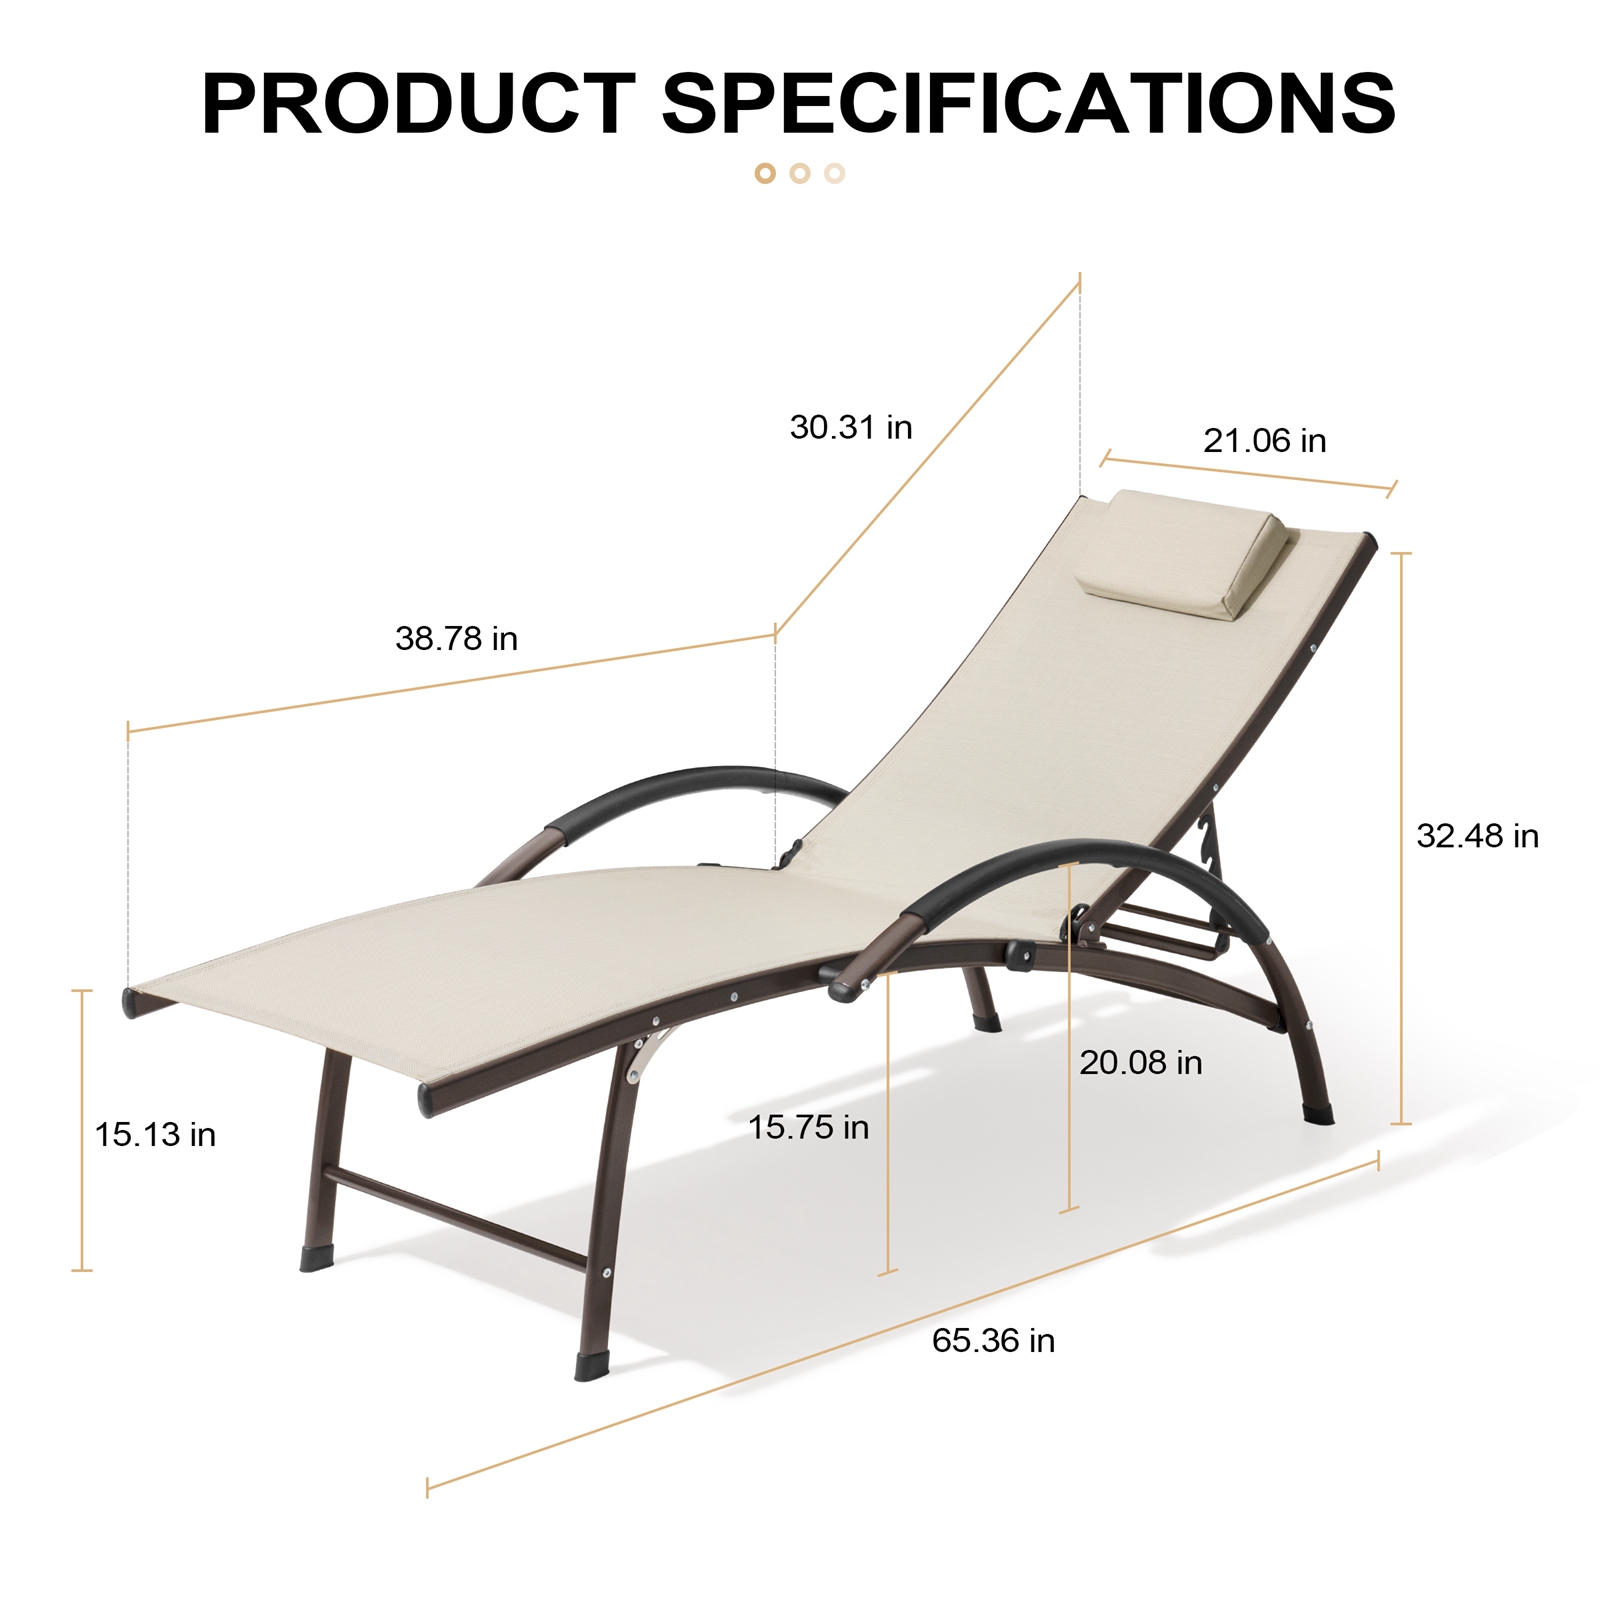 Crestlive Products Aluminum Outdoor Folding Reclining Chaise Lounge Chair in Tan - image 3 of 7